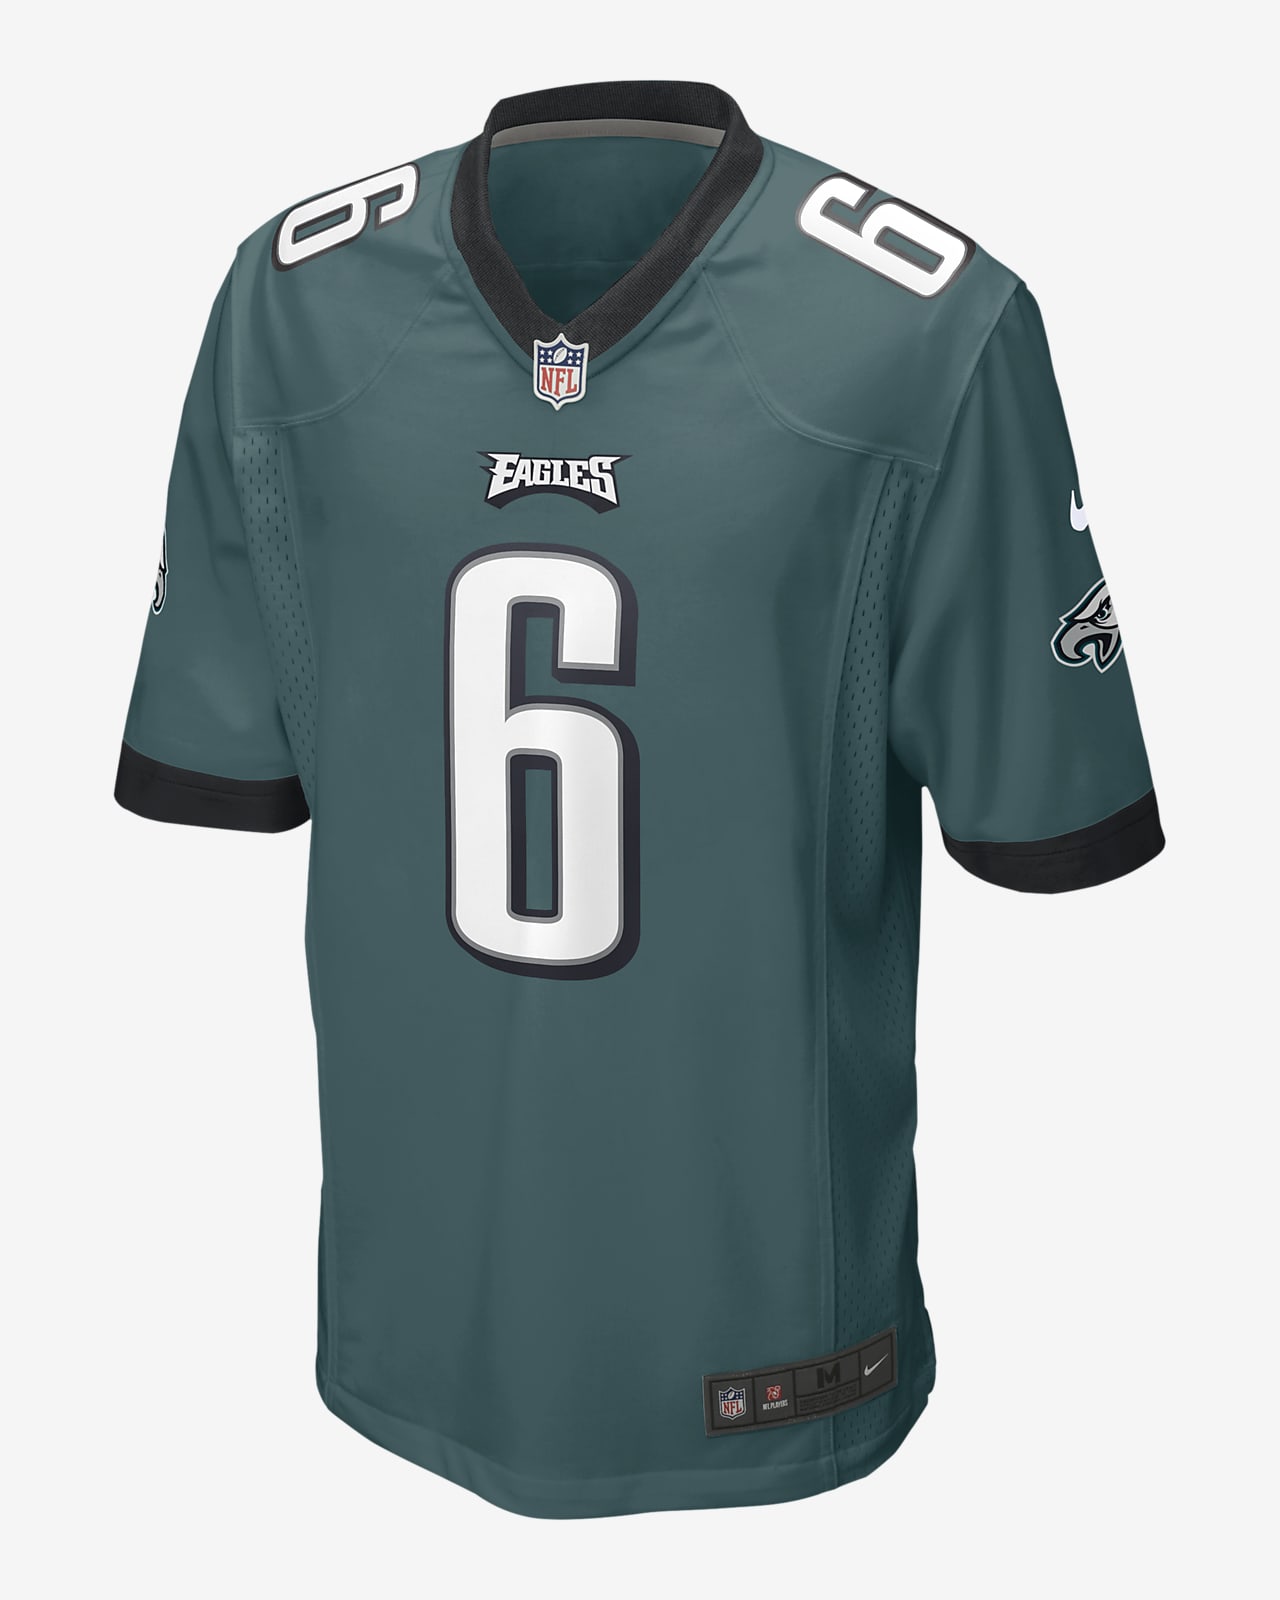 https://static.nike.com/a/images/t_PDP_1280_v1/f_auto,q_auto:eco/098bbfd8-cea6-4371-a6f2-137ac89acead/philadelphia-eagles-game-american-football-jersey-rMVLS1.png